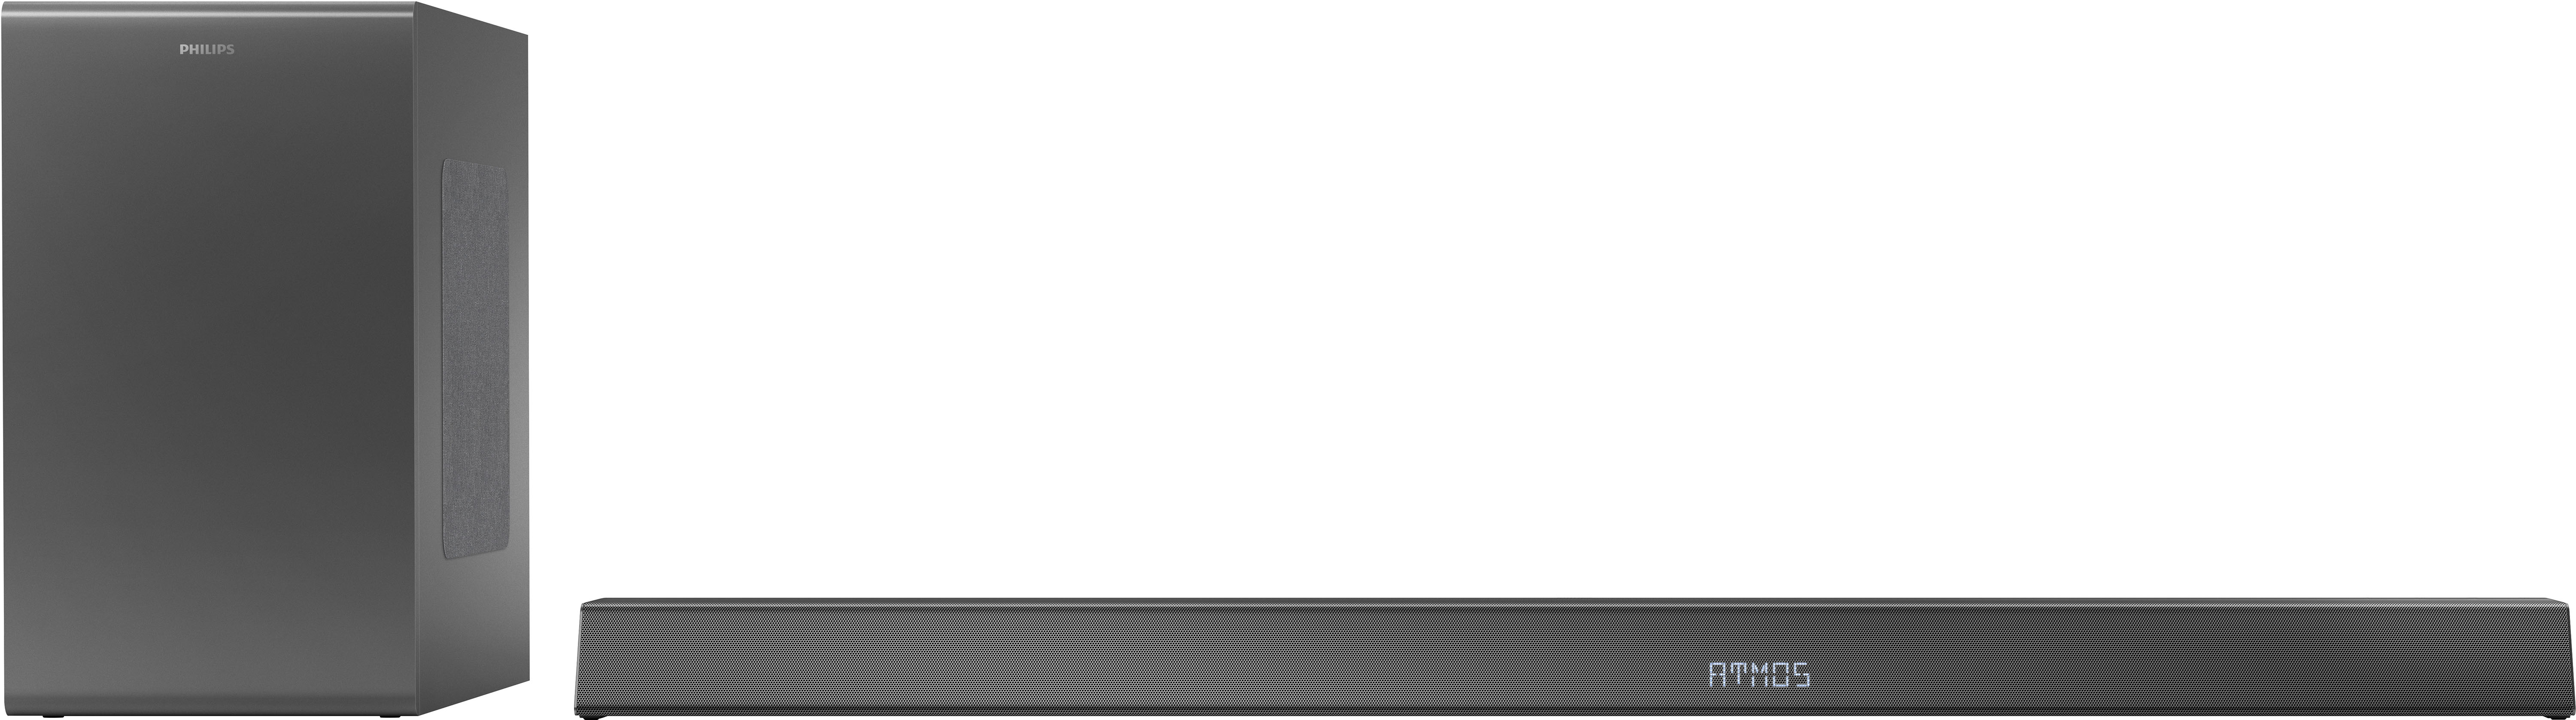 3.1.2-Channel Soundbar with Subwoofer, Dolby and expandable surround sound Dark grey TAB8905/37 - Best Buy